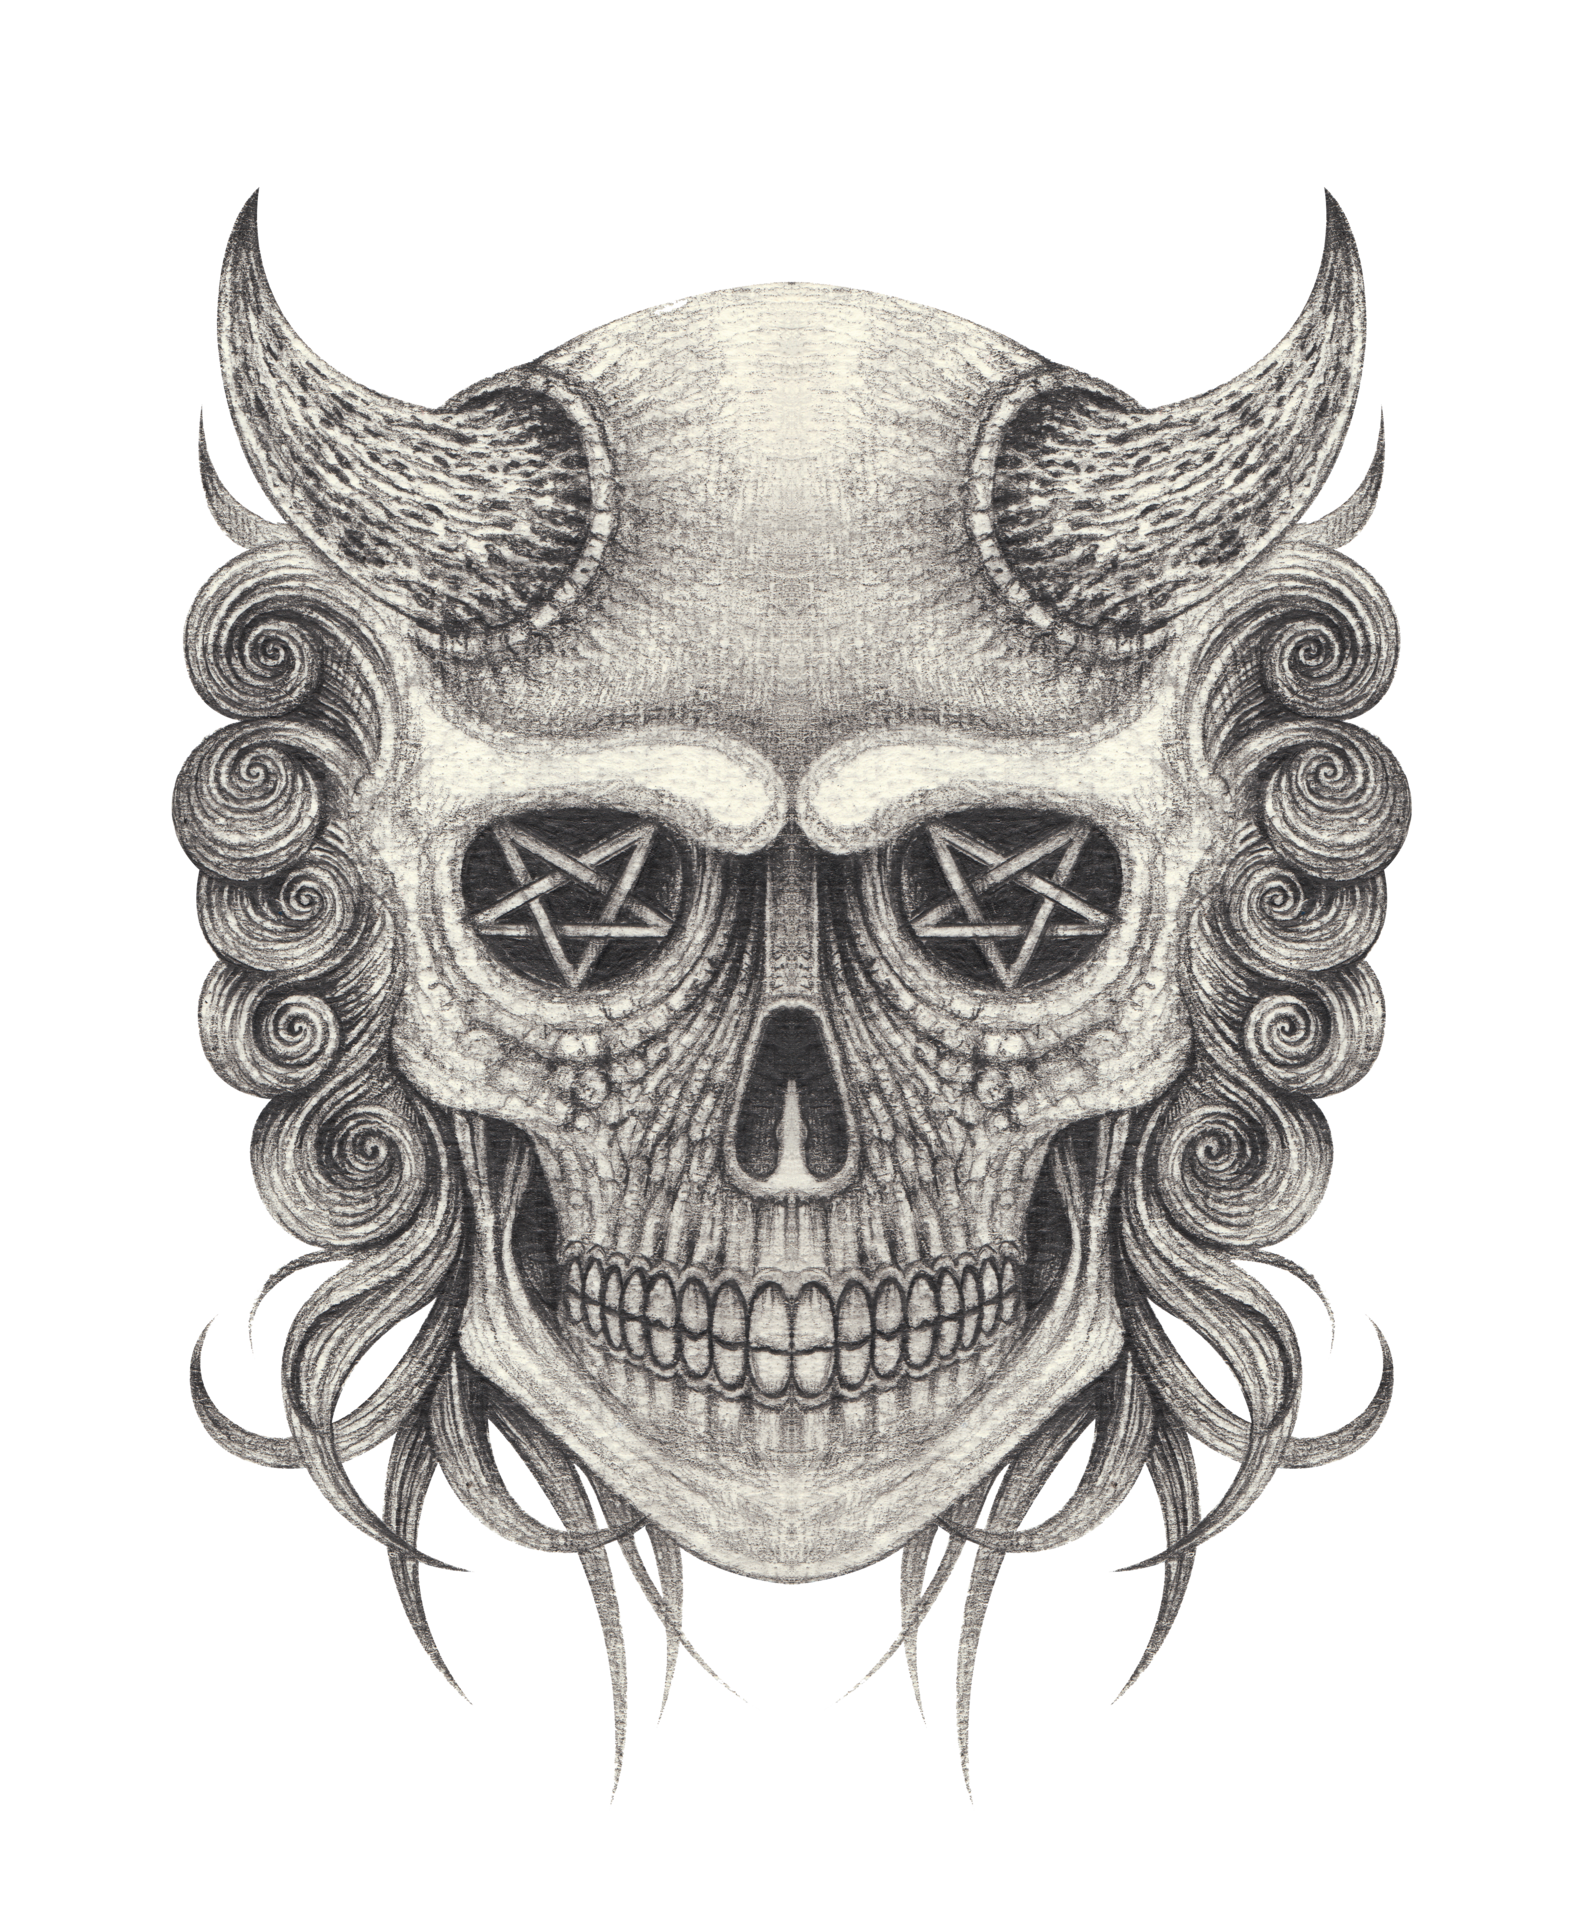 Tattoo art 3 demons over grey background Sketch Stock Photo by  outsiderzone 21624629